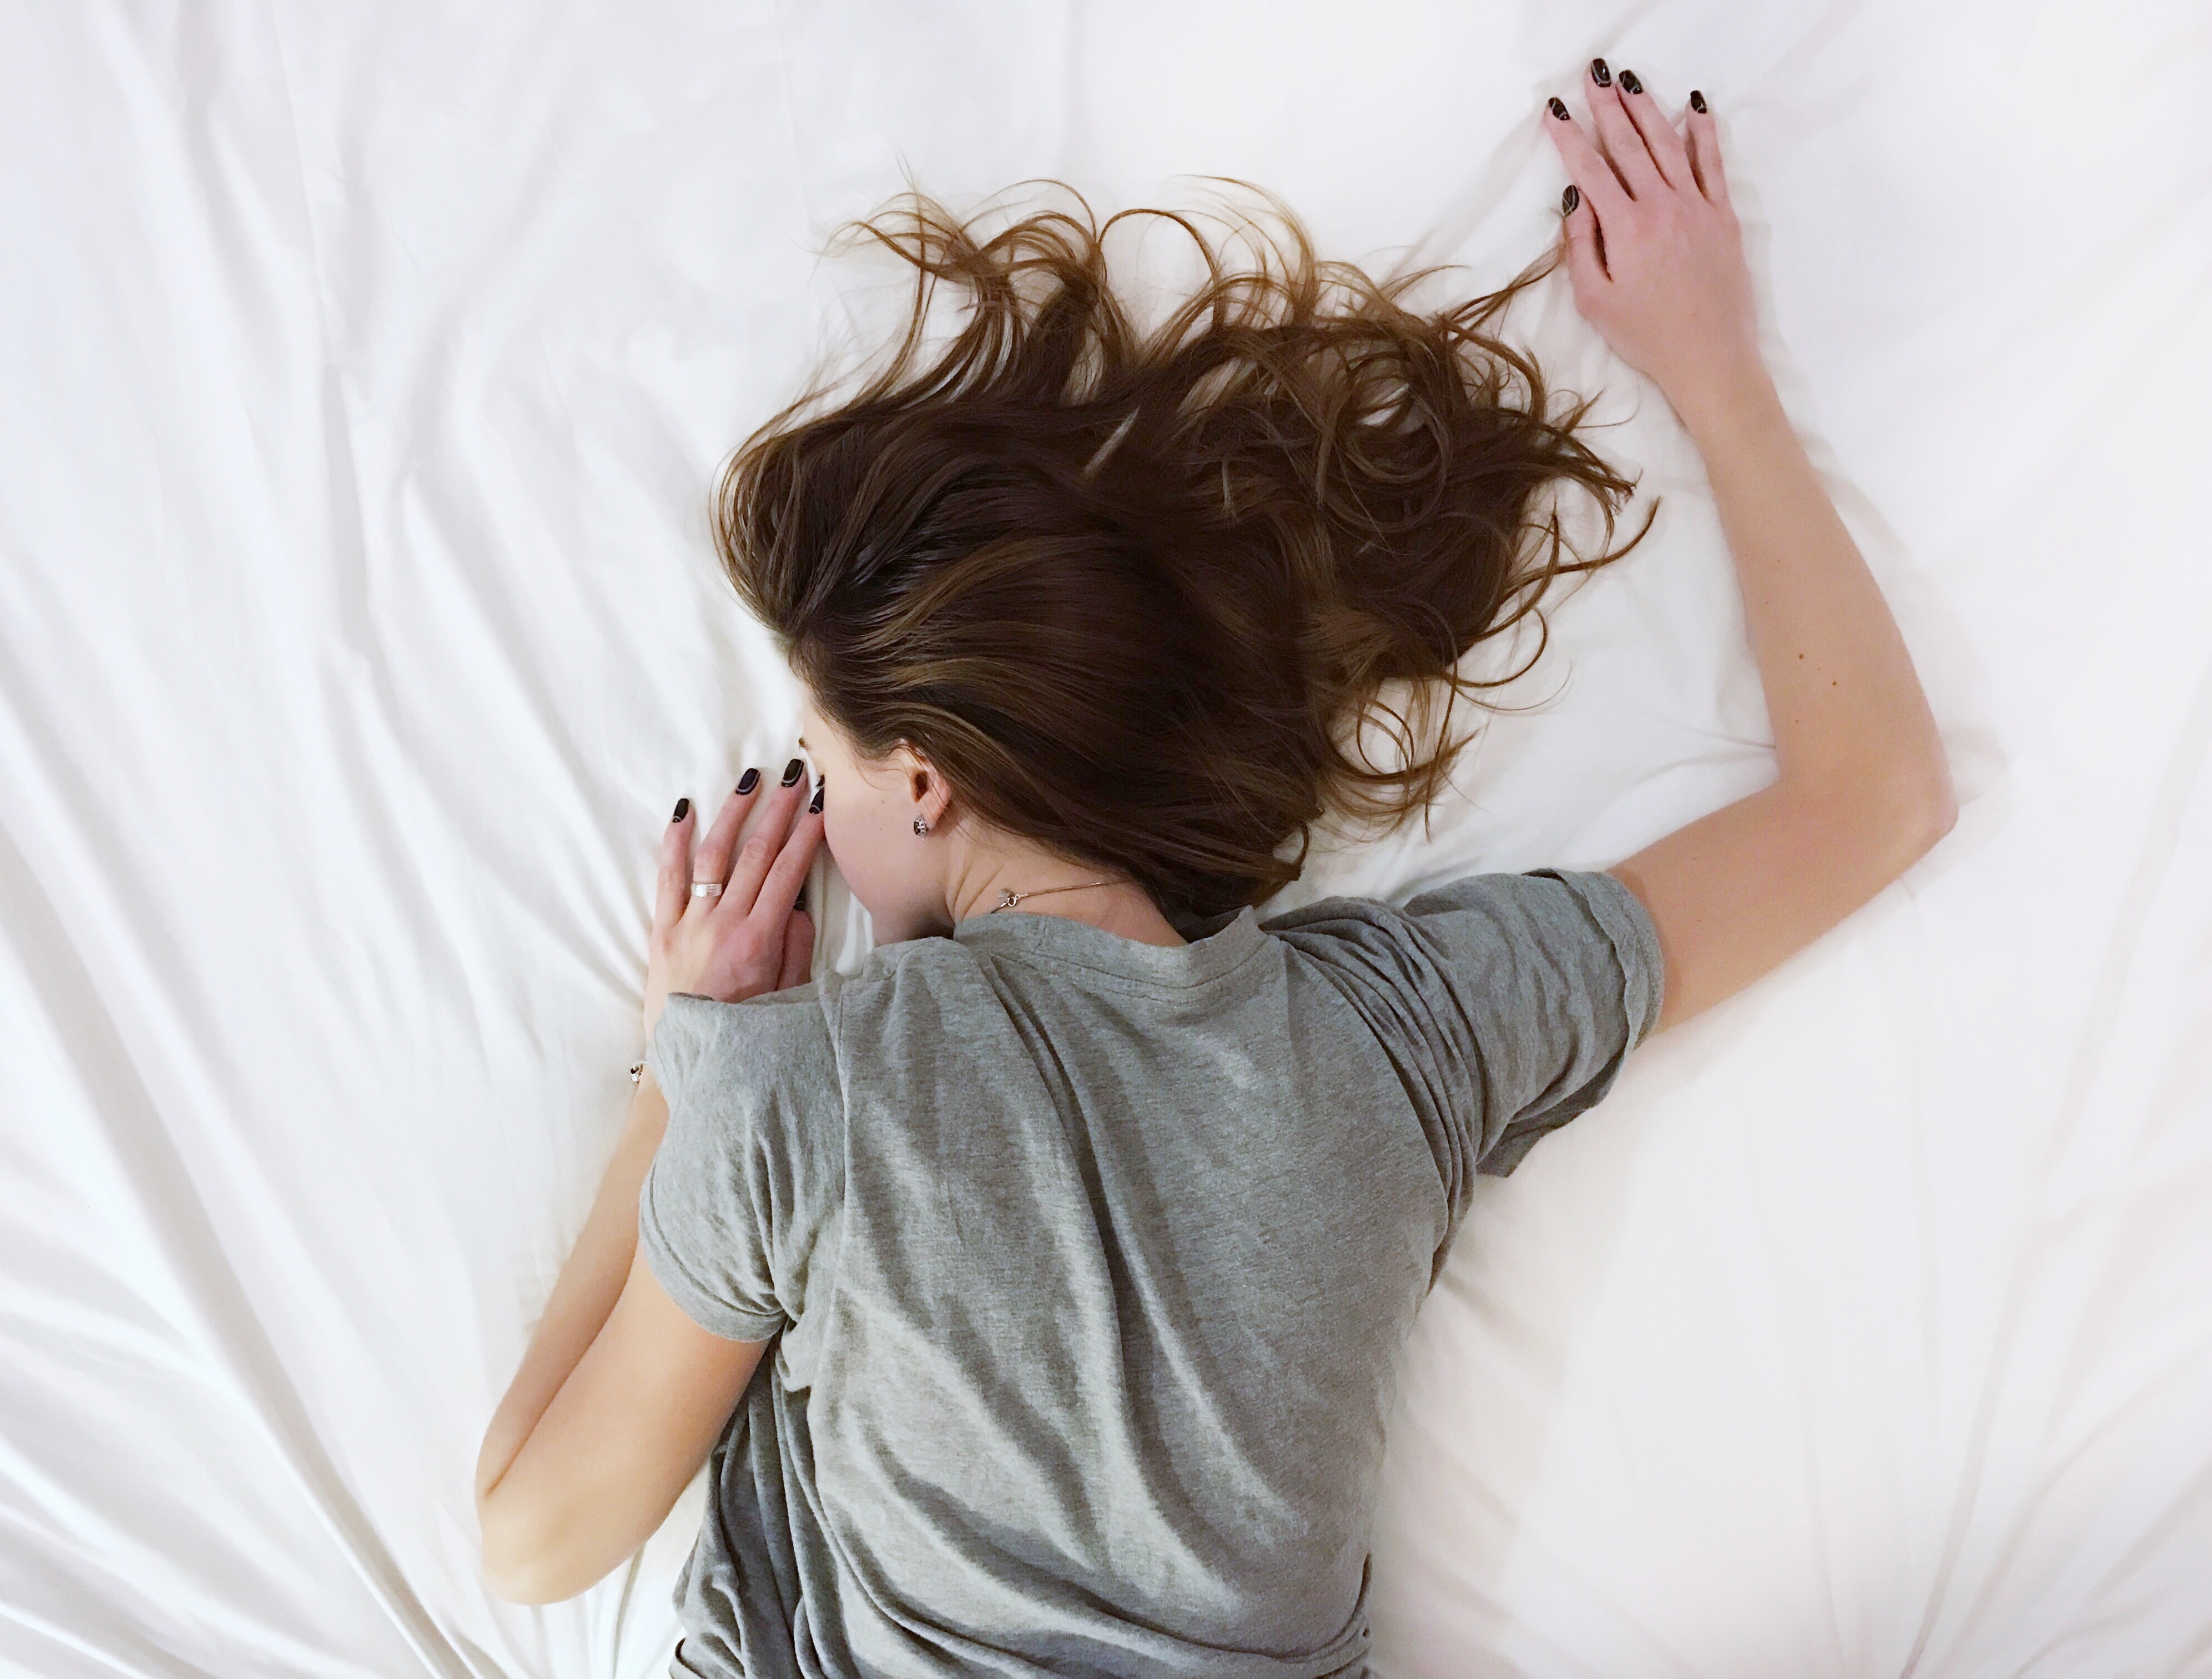 9 Sleeping Positions that Help Prevent Lower Back Pain - Vive Health